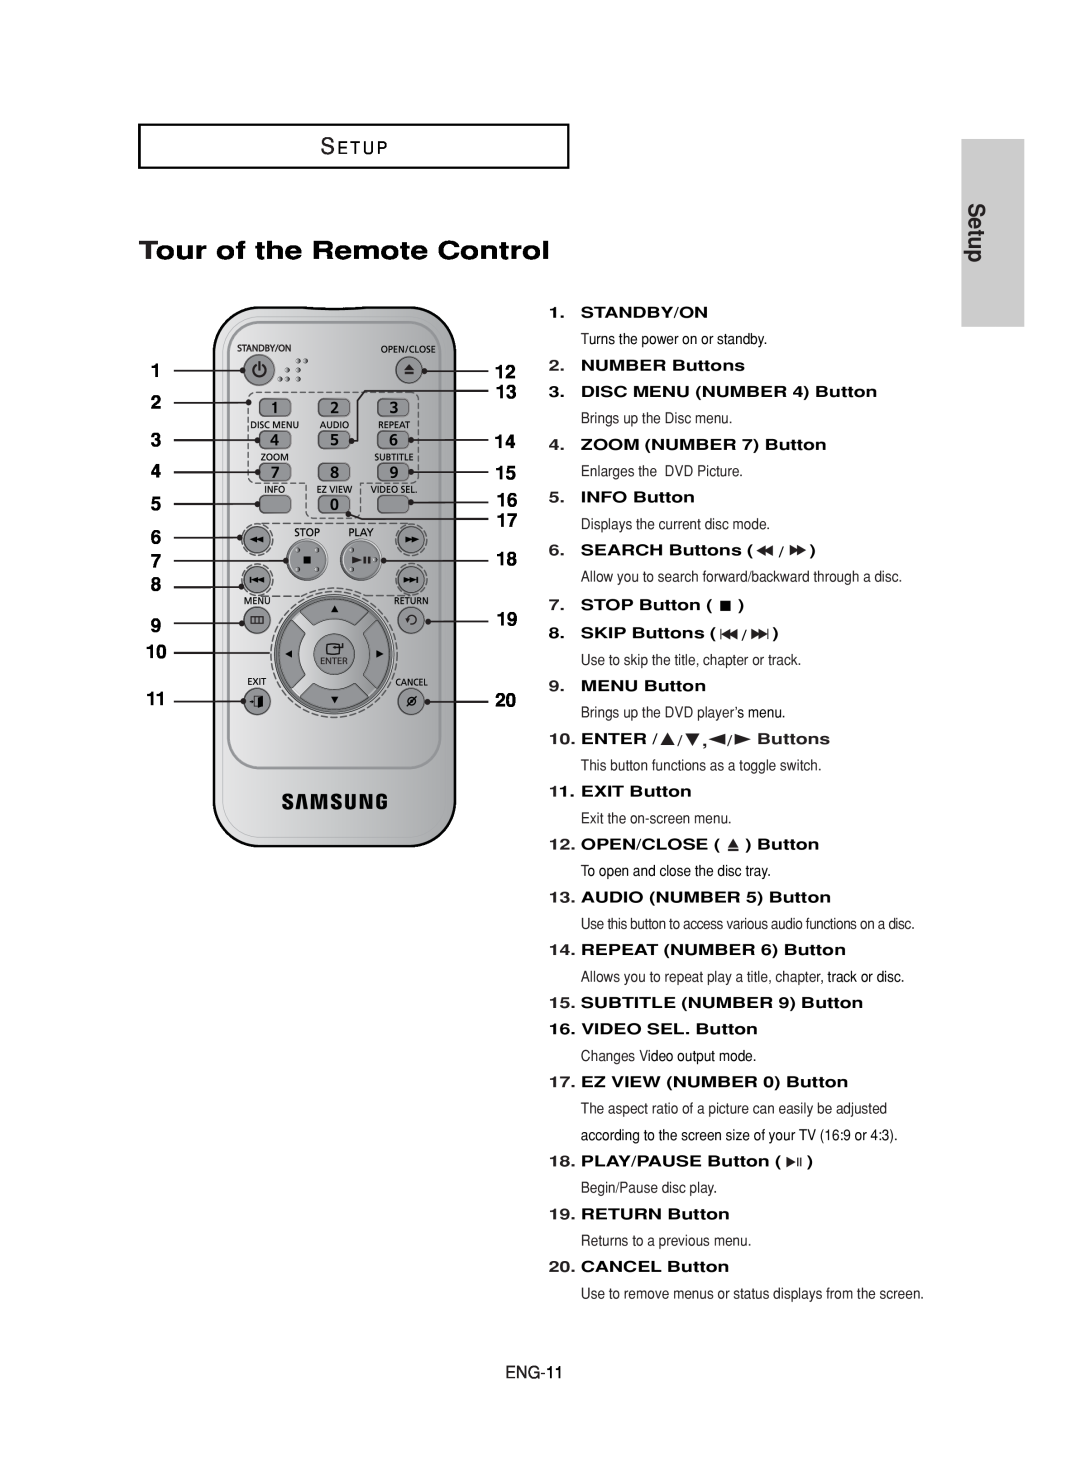 Samsung DVD-F1080, DVD-FP580 manual Tour of the Remote Control, Setup, S E T U P, ENG-11, Displays the current disc mode 